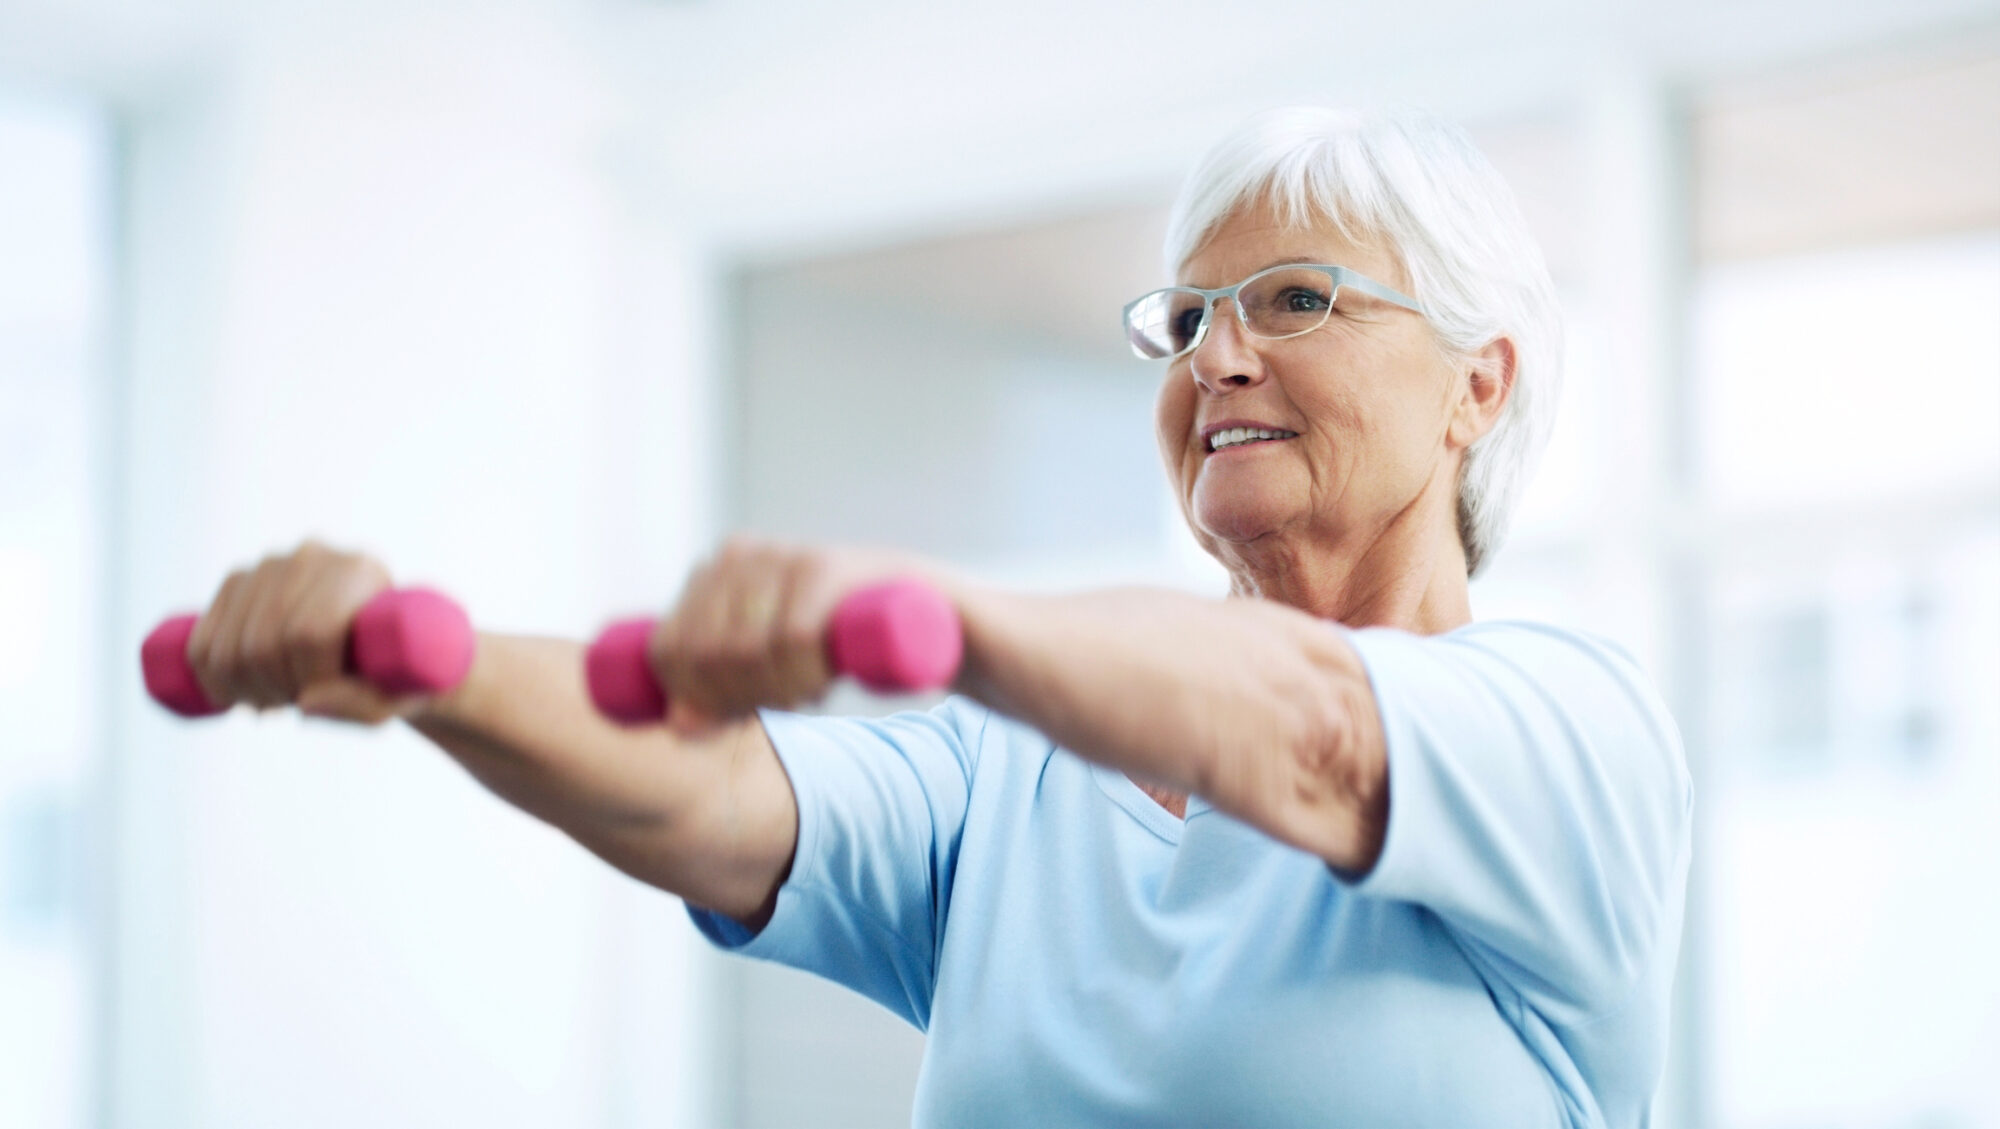 Women keeping herself fit and healthy in her latter years